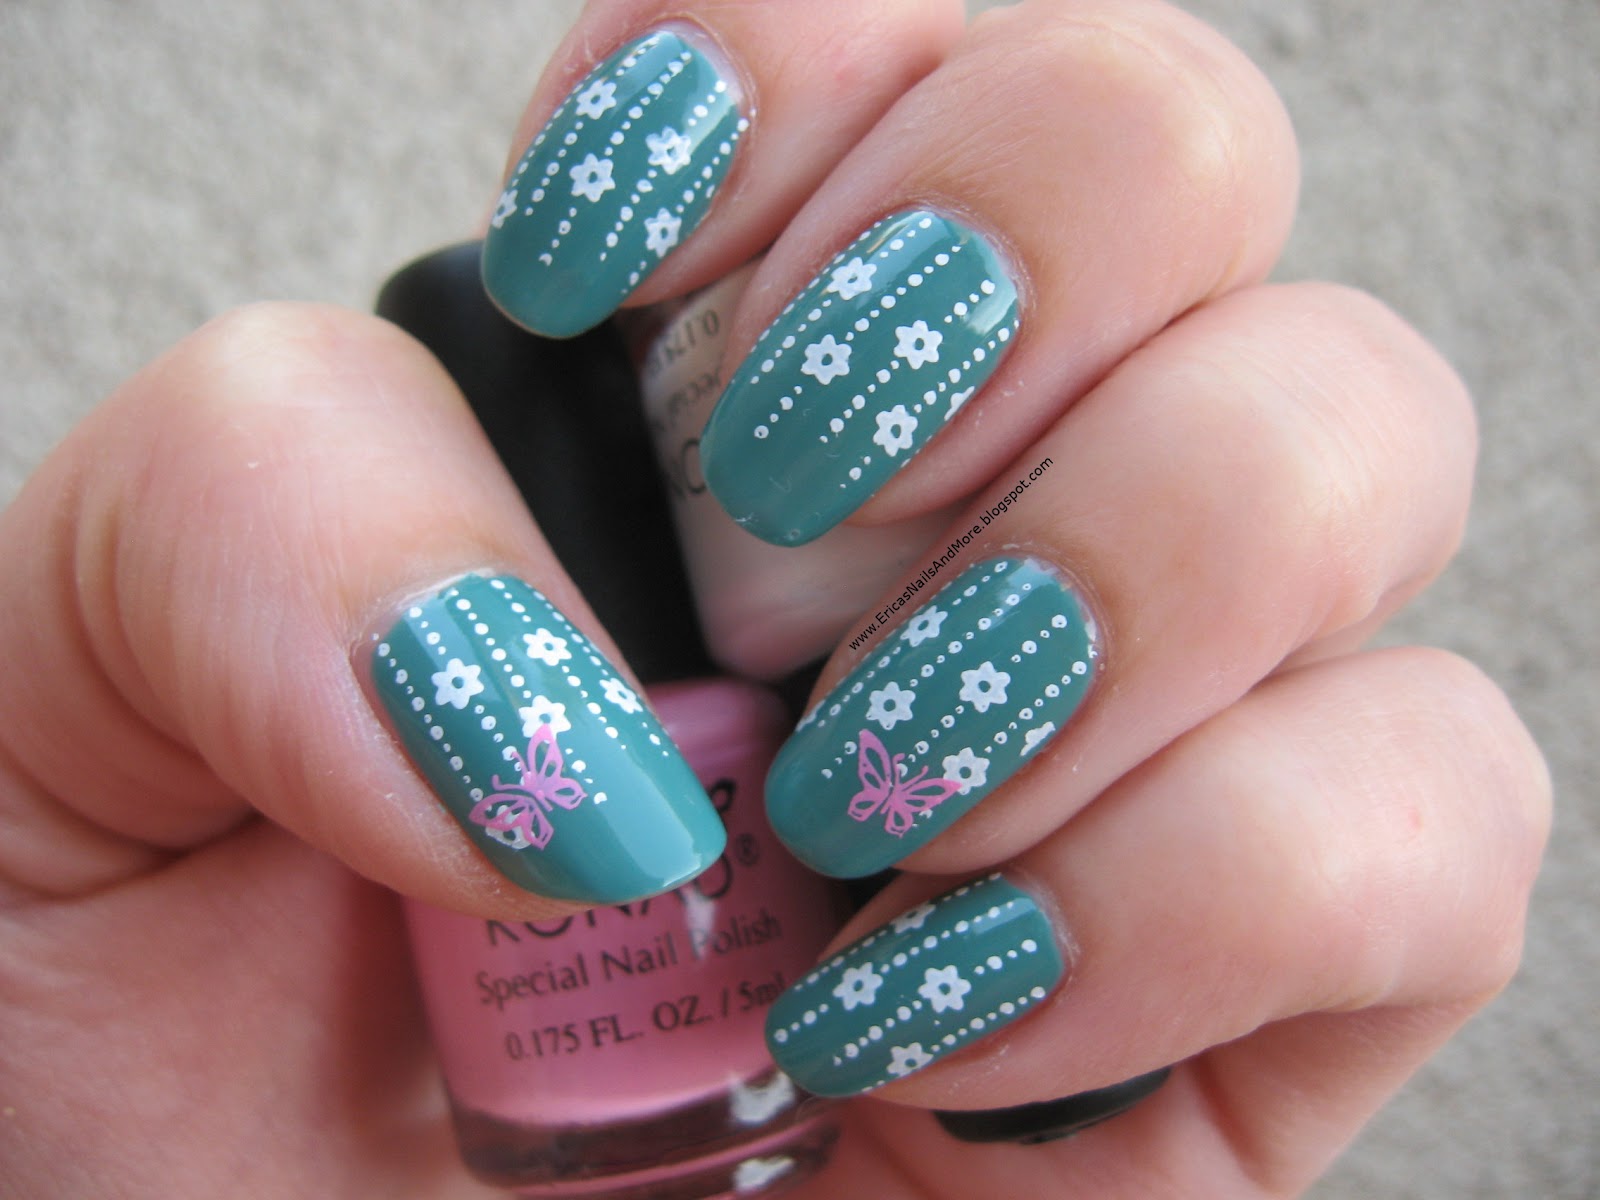 10. Stamping Nail Art Ideas - wide 8